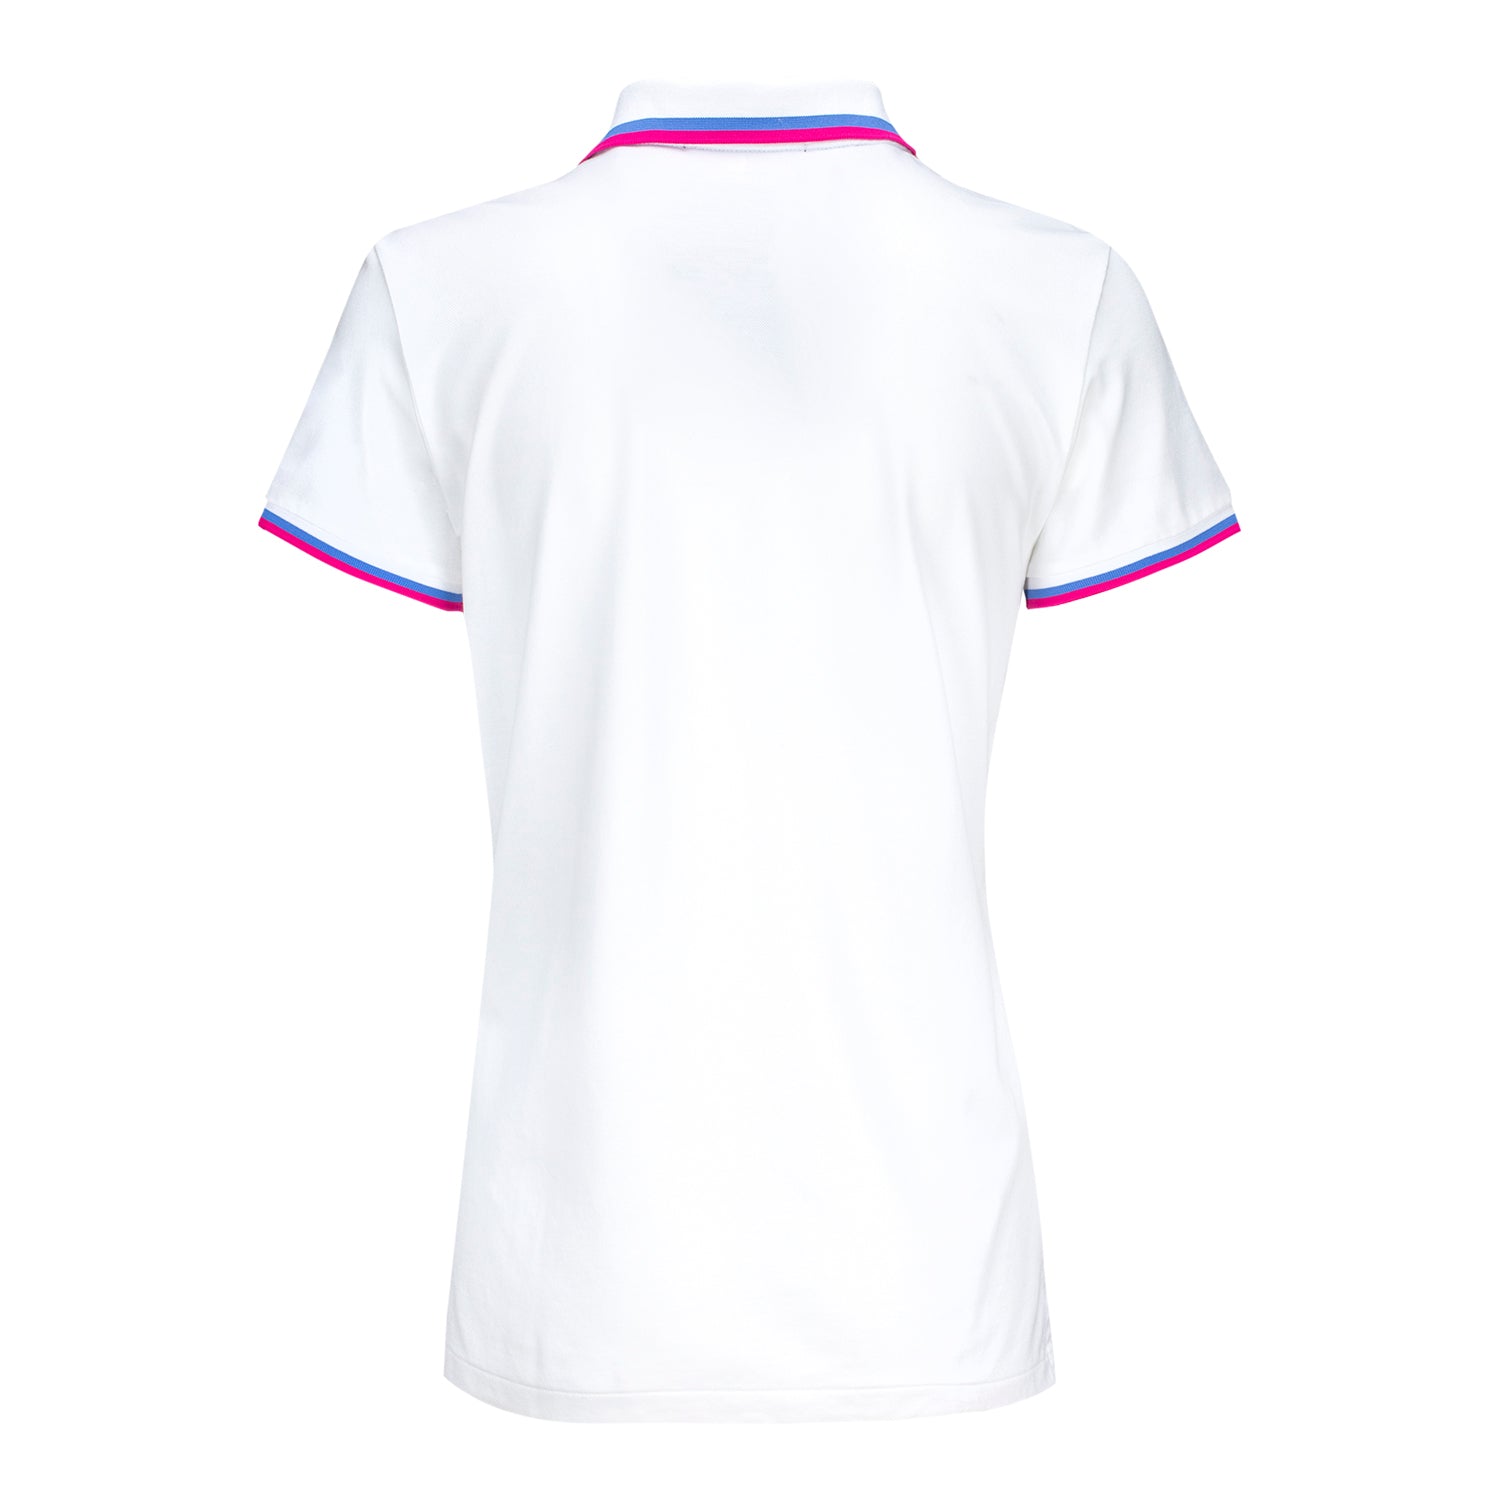 Ralph Lauren 2025 PGA Championship Women's Pique Polo in White with Pink and Blue - Front View